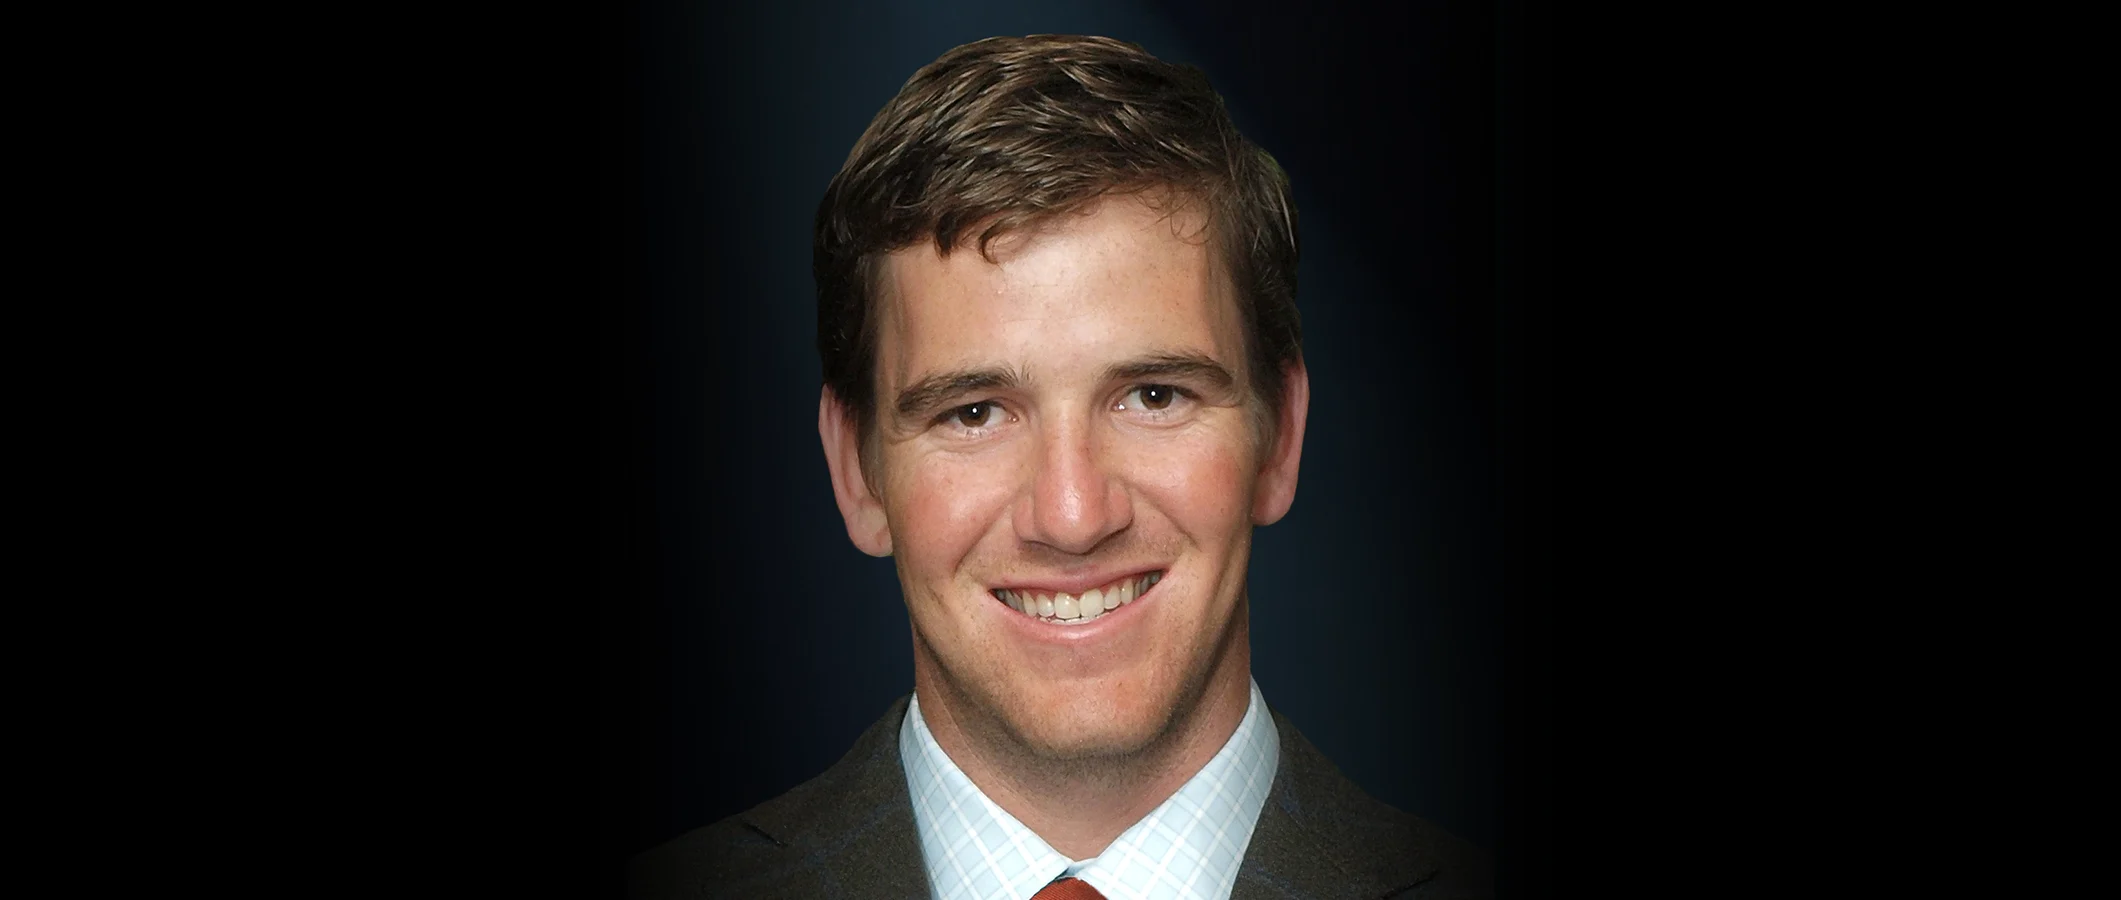 Podcast 140: NFL Champion Eli Manning on Training Your Mind and Reducing Injury